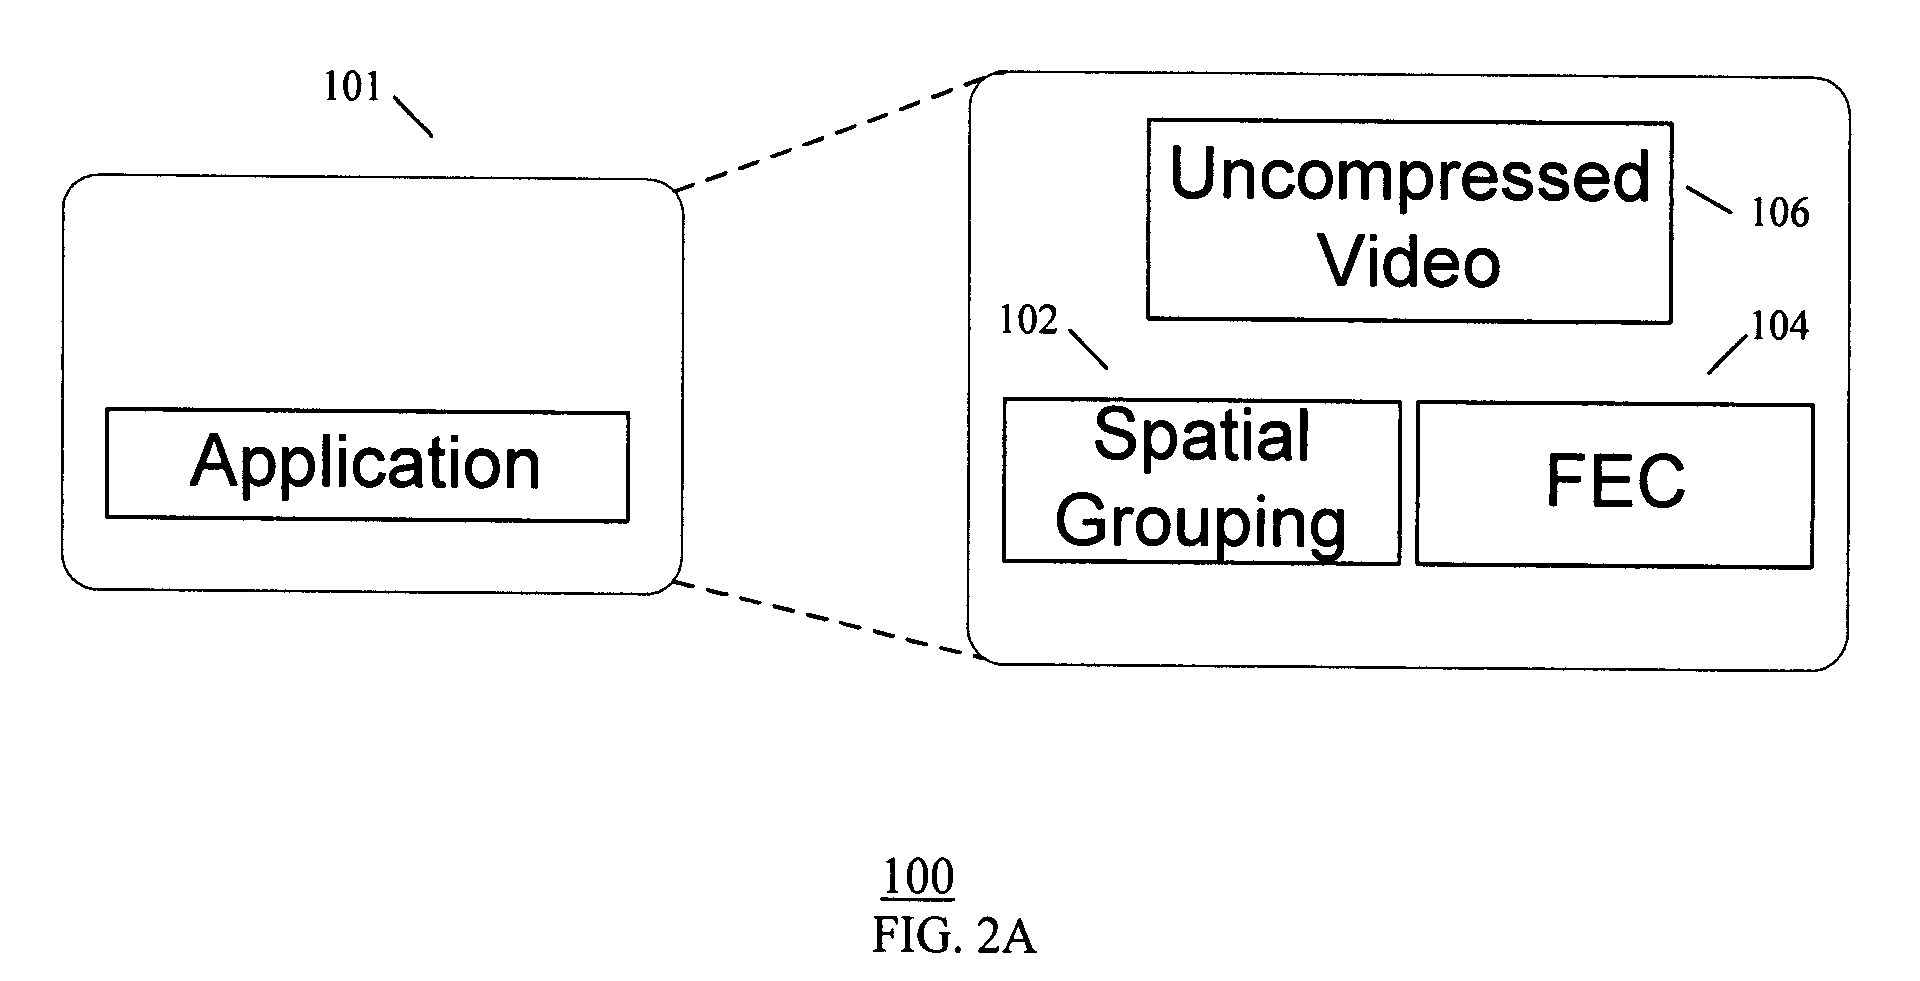 Method and system for wireless communication of uncompressed video information